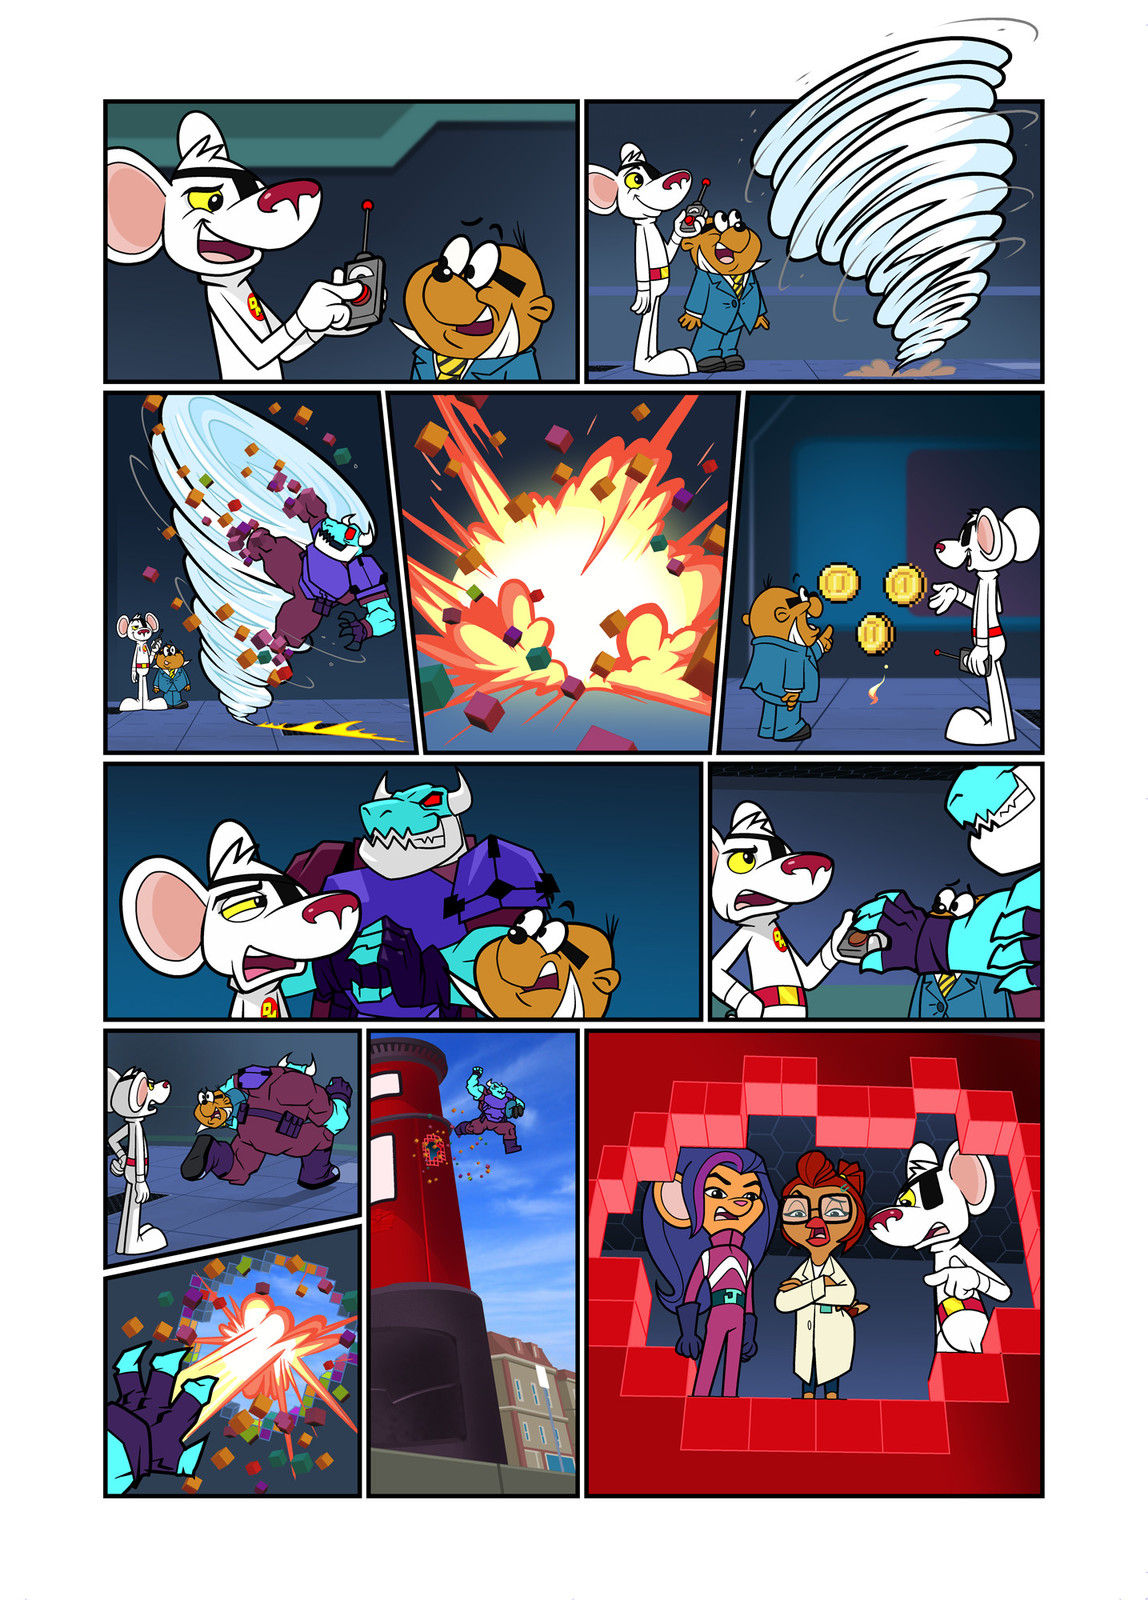 Danger Mouse - "The Mouse Who Noob too much!" Page 4